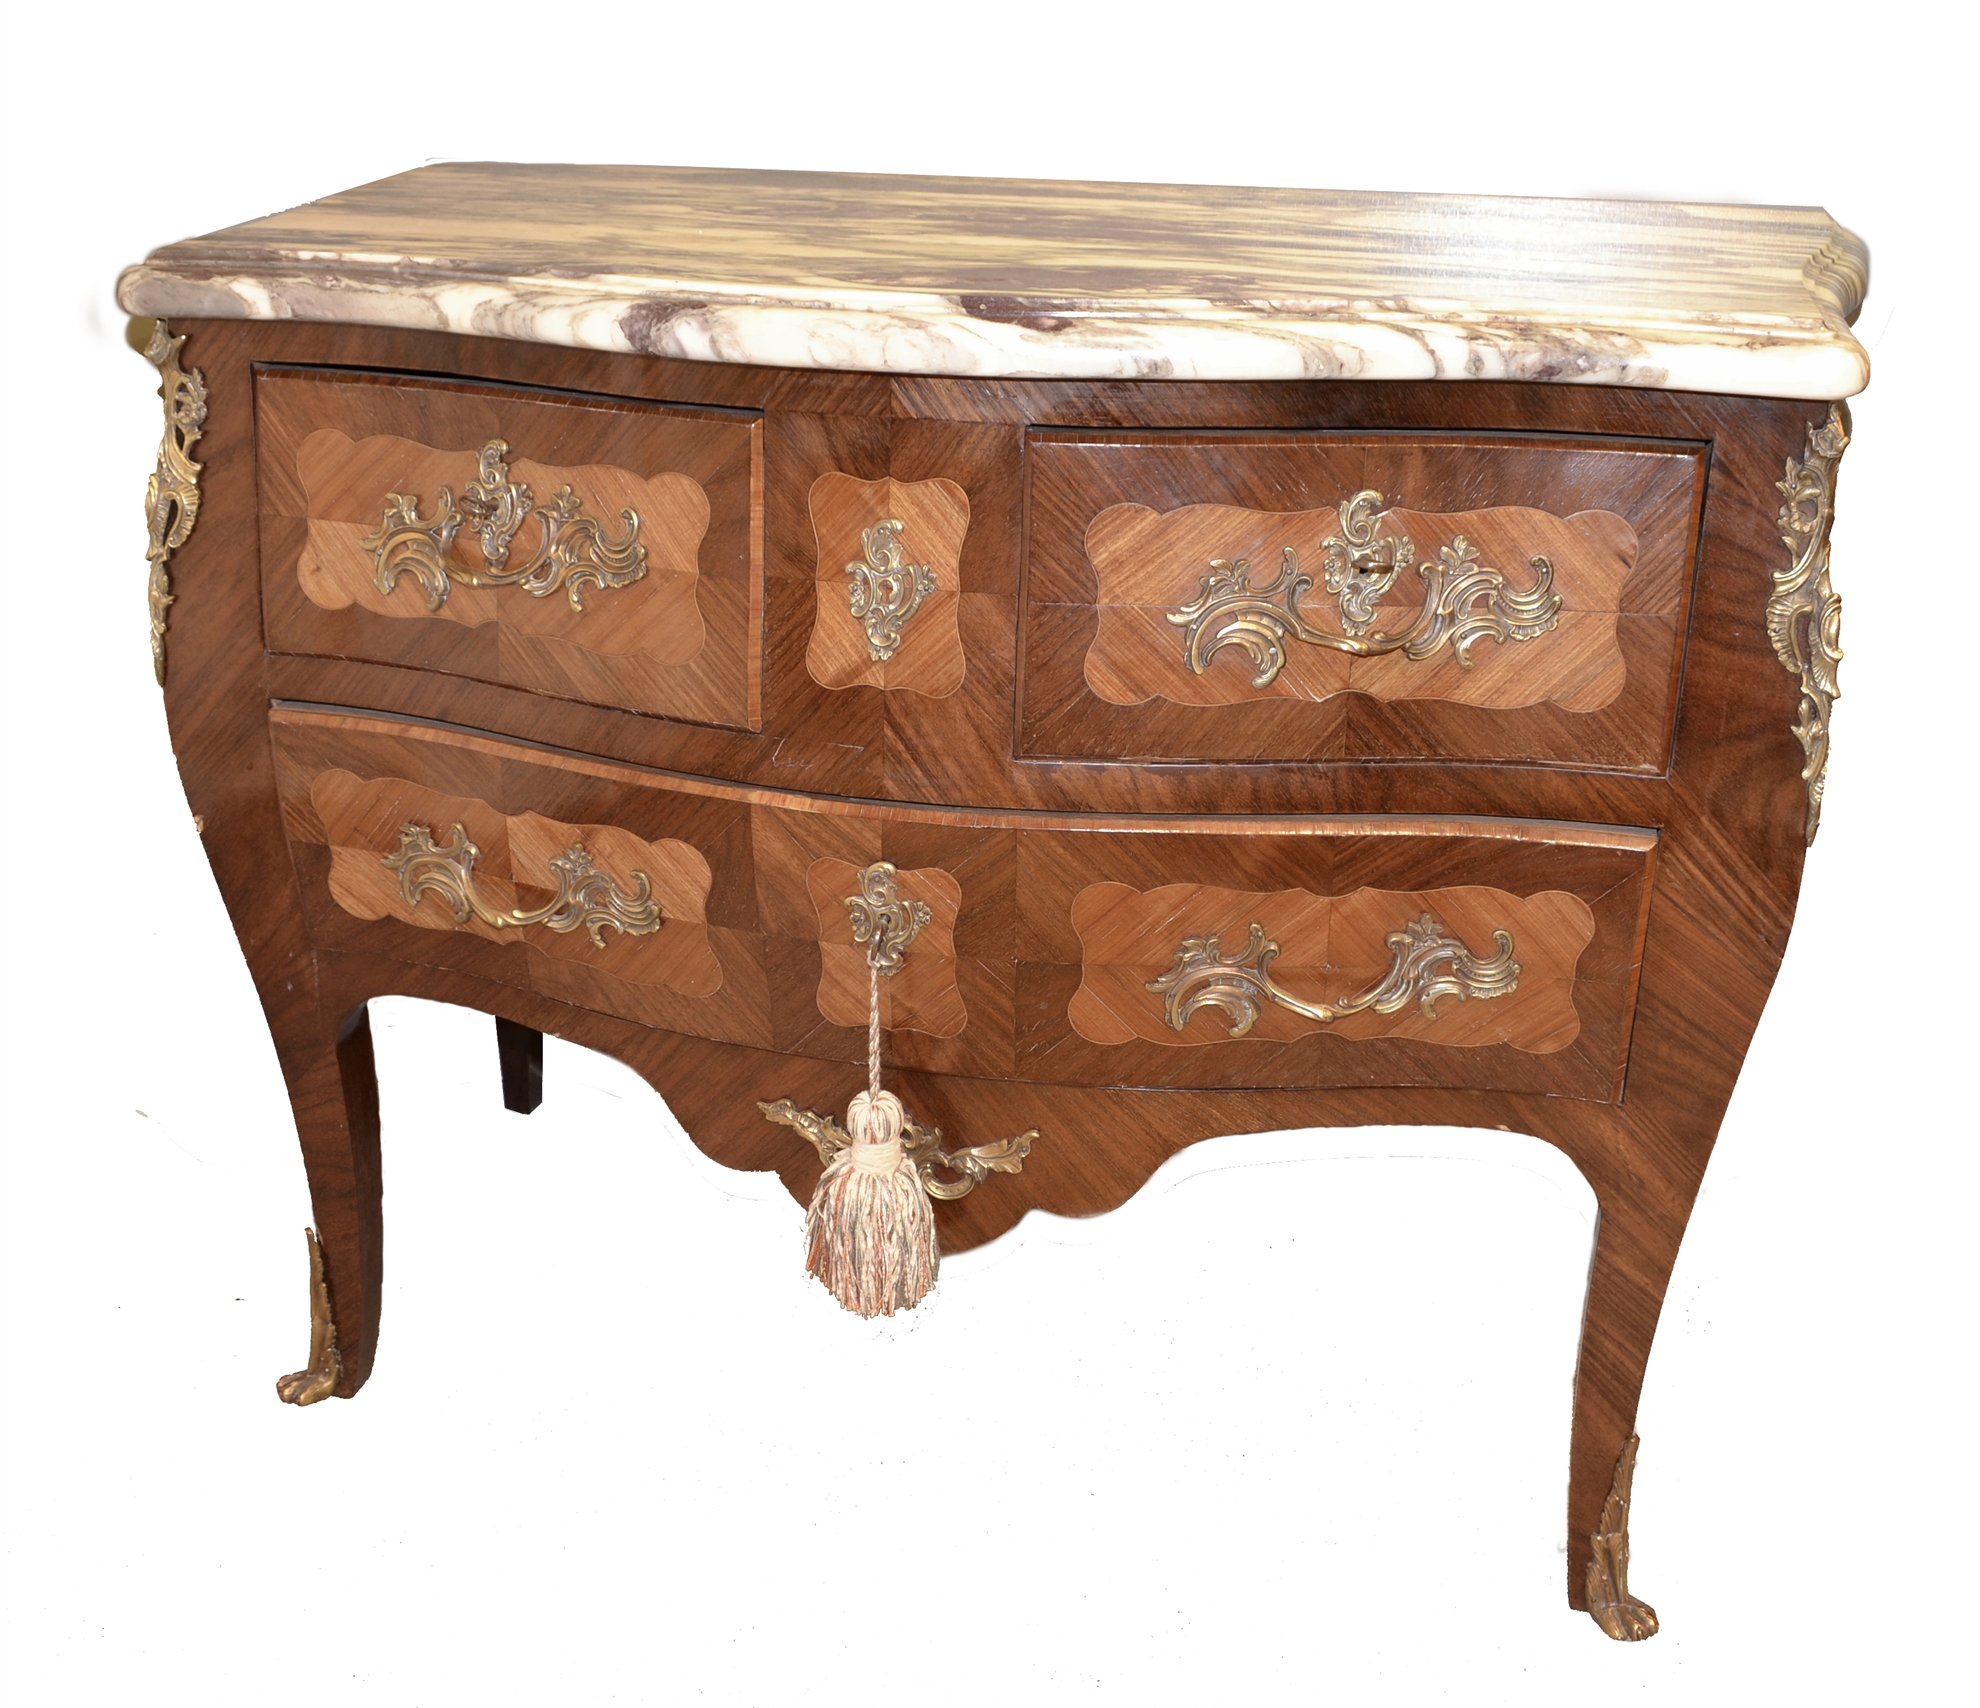 123/2020 - Marquetry Commode with Marble Top